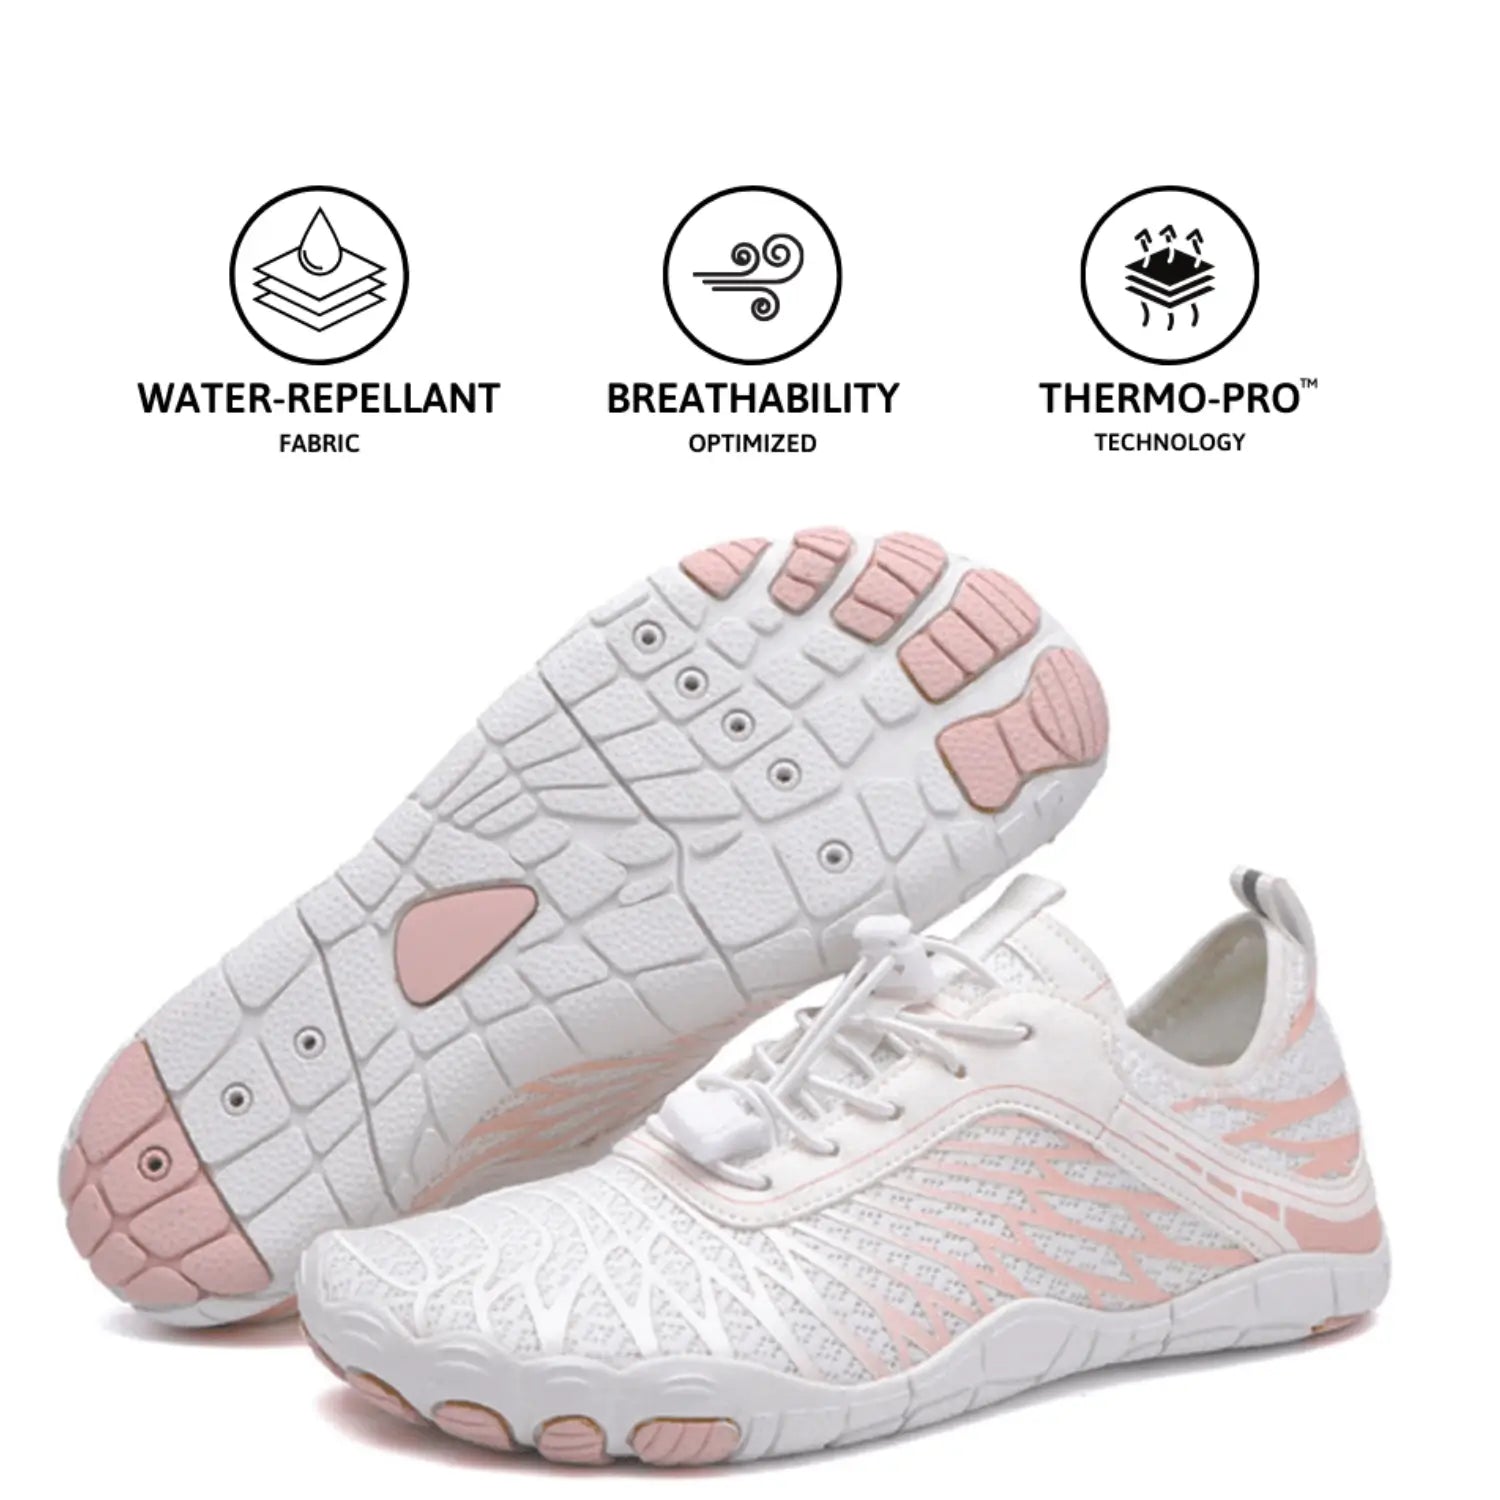 Purestep Motion - Healthy & non-slip everyday barefoot shoes (Unisex) (1+1 FREE)